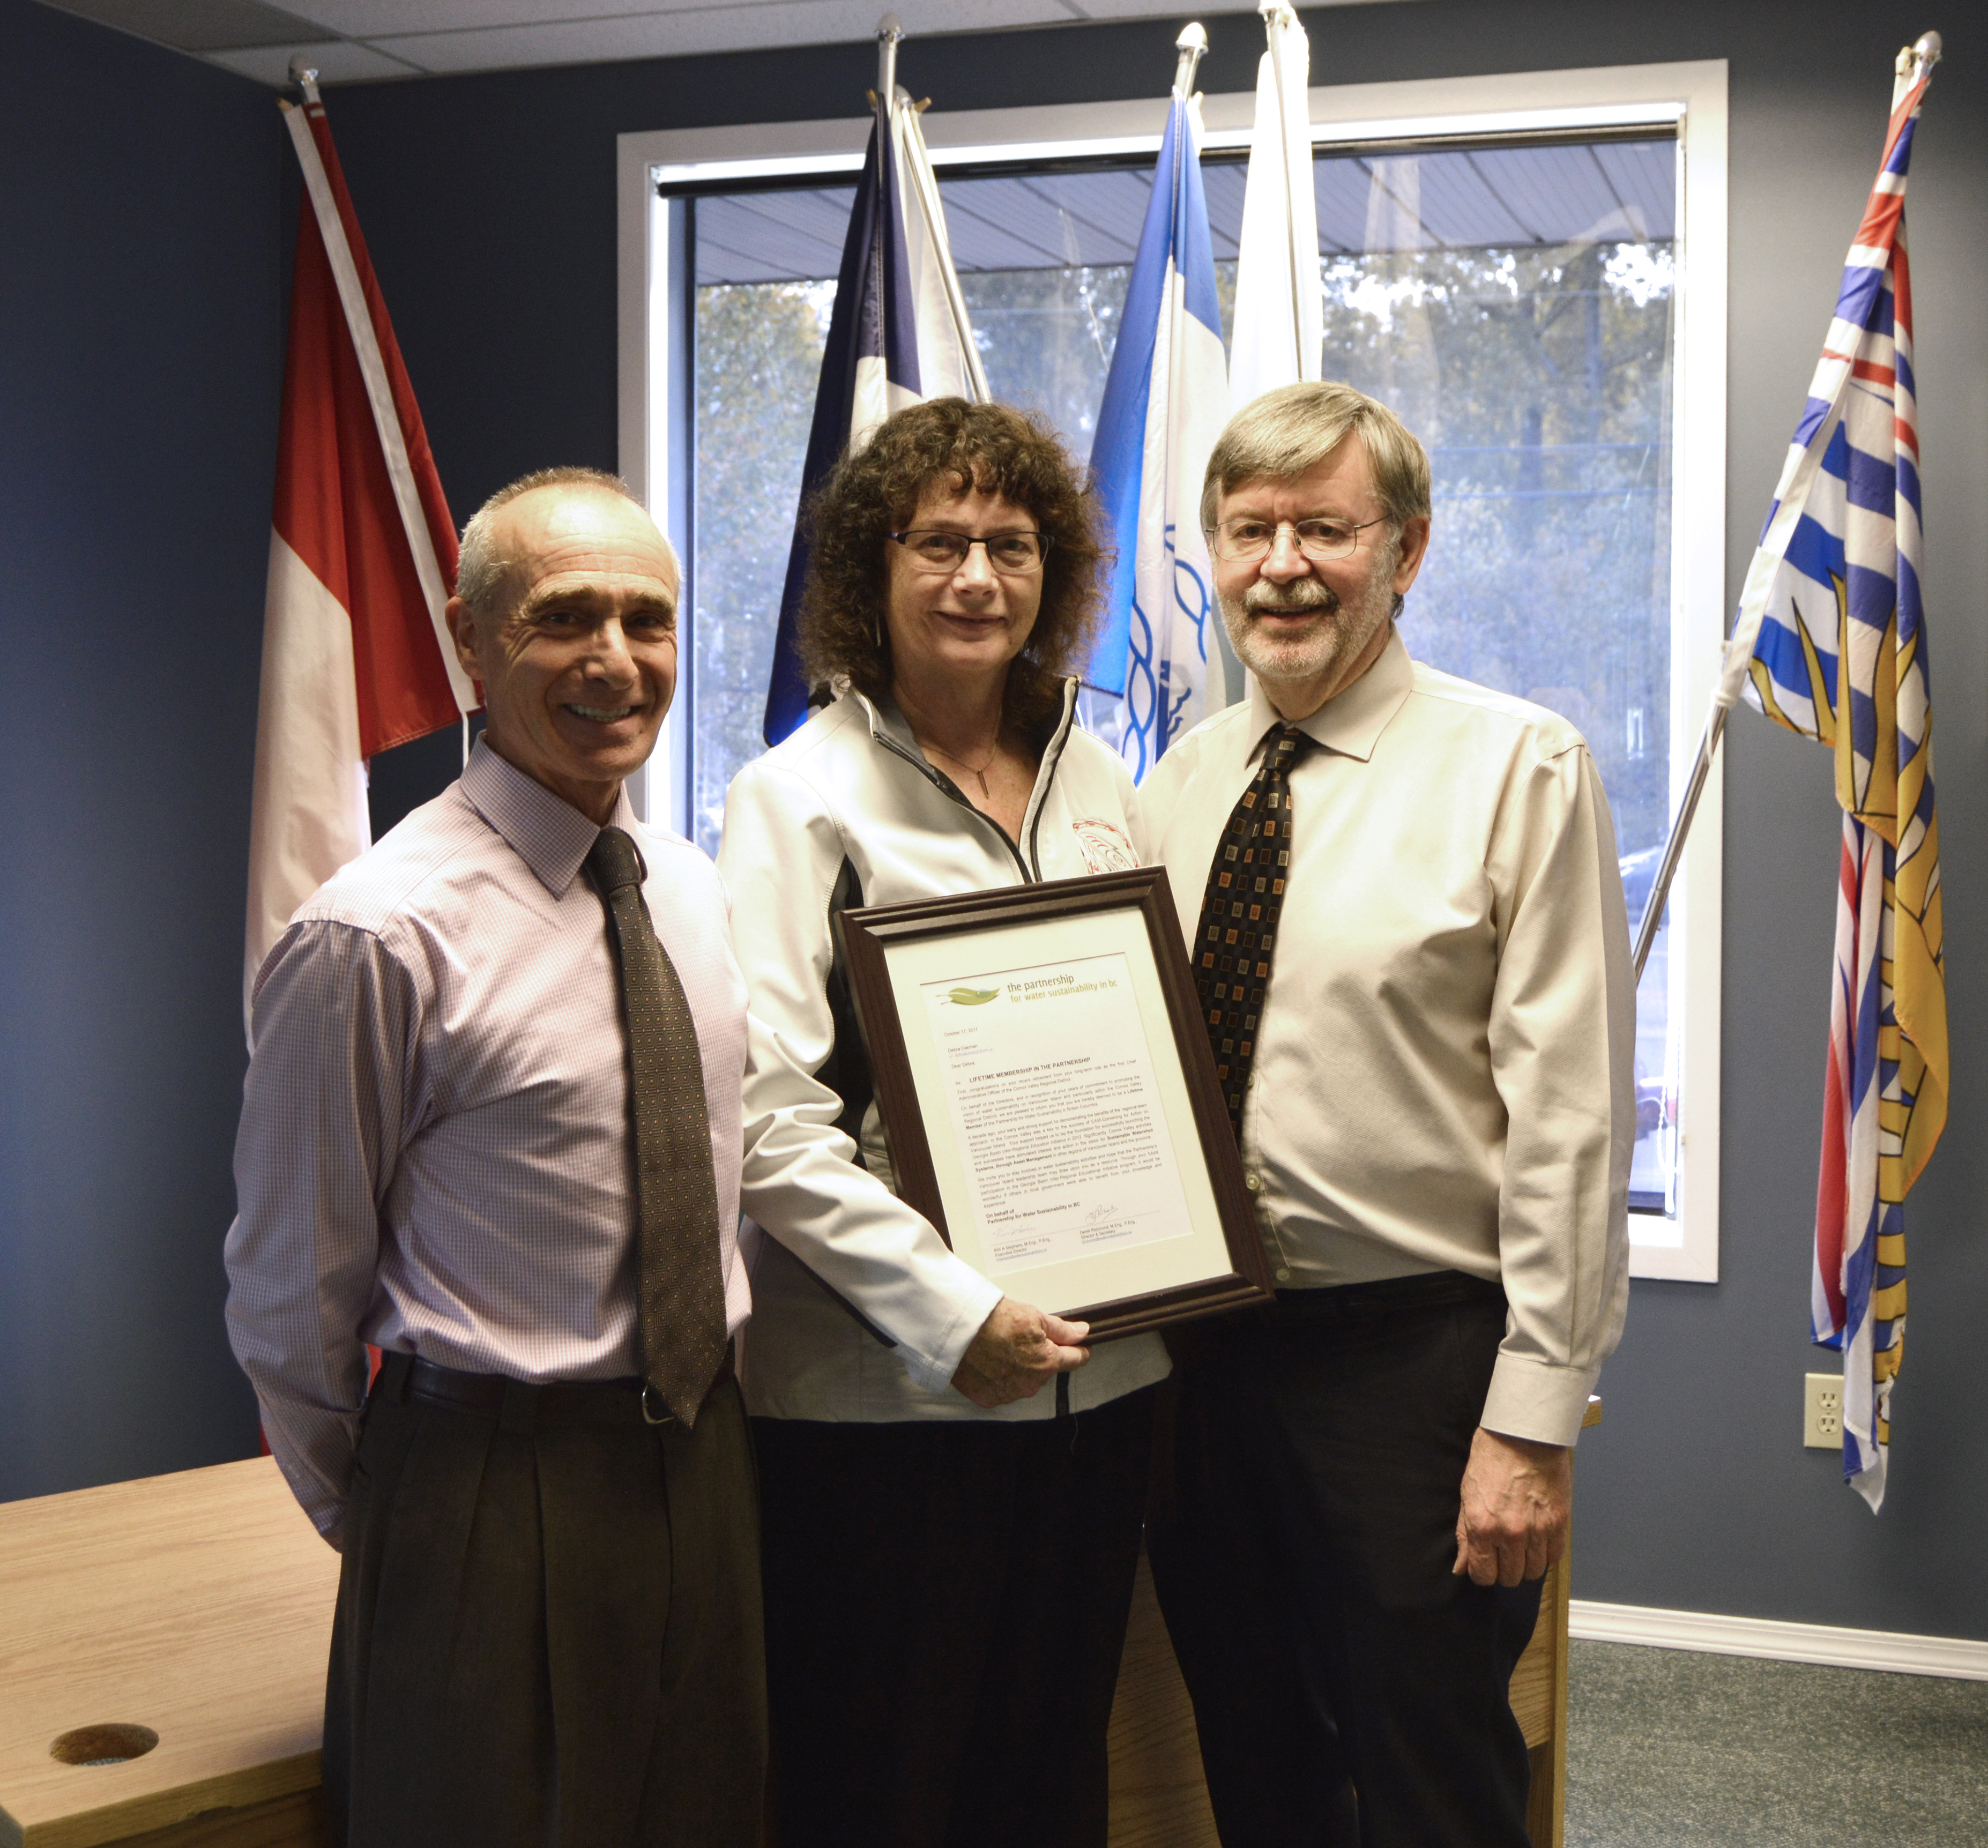 Derek Richmond (Director & CAVI Past-Chair) and Kim Stephens (Executive Director) co-presented a framed copy of the “letter of recognition” attesting to Debra’s Lifetime Membership in the Partnership.